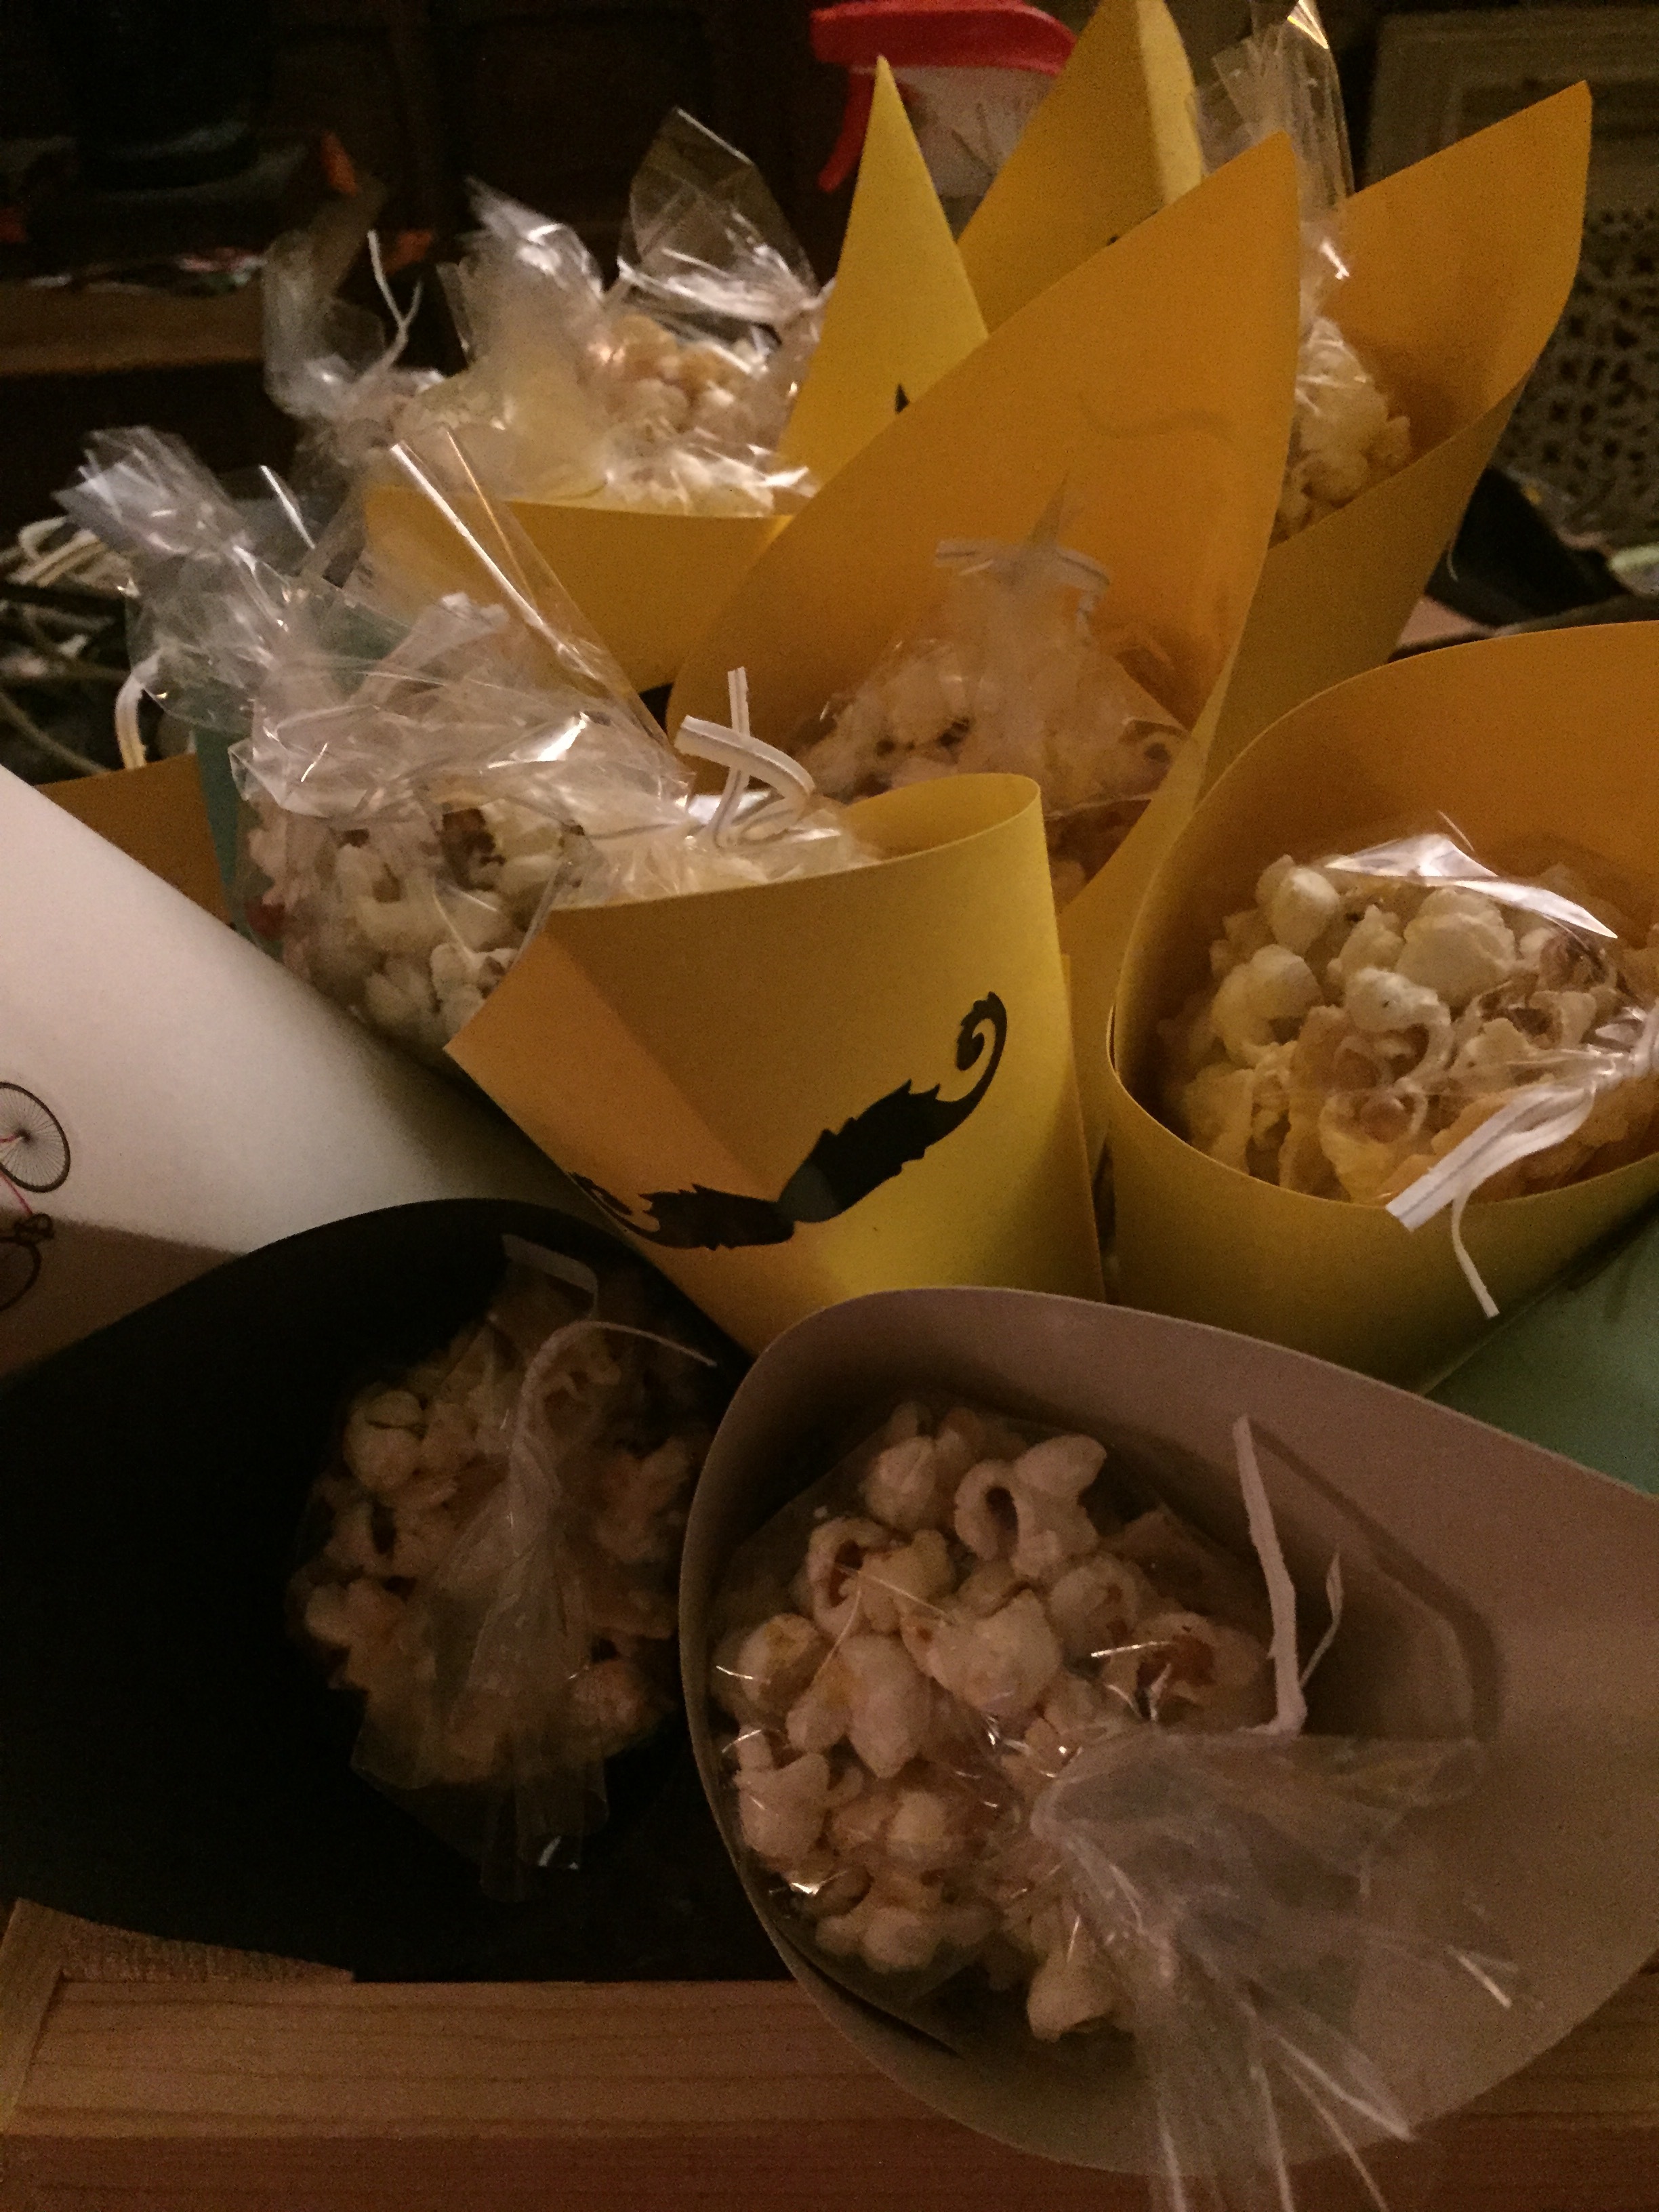 Viewing party gallery - signature popcorn.JPG